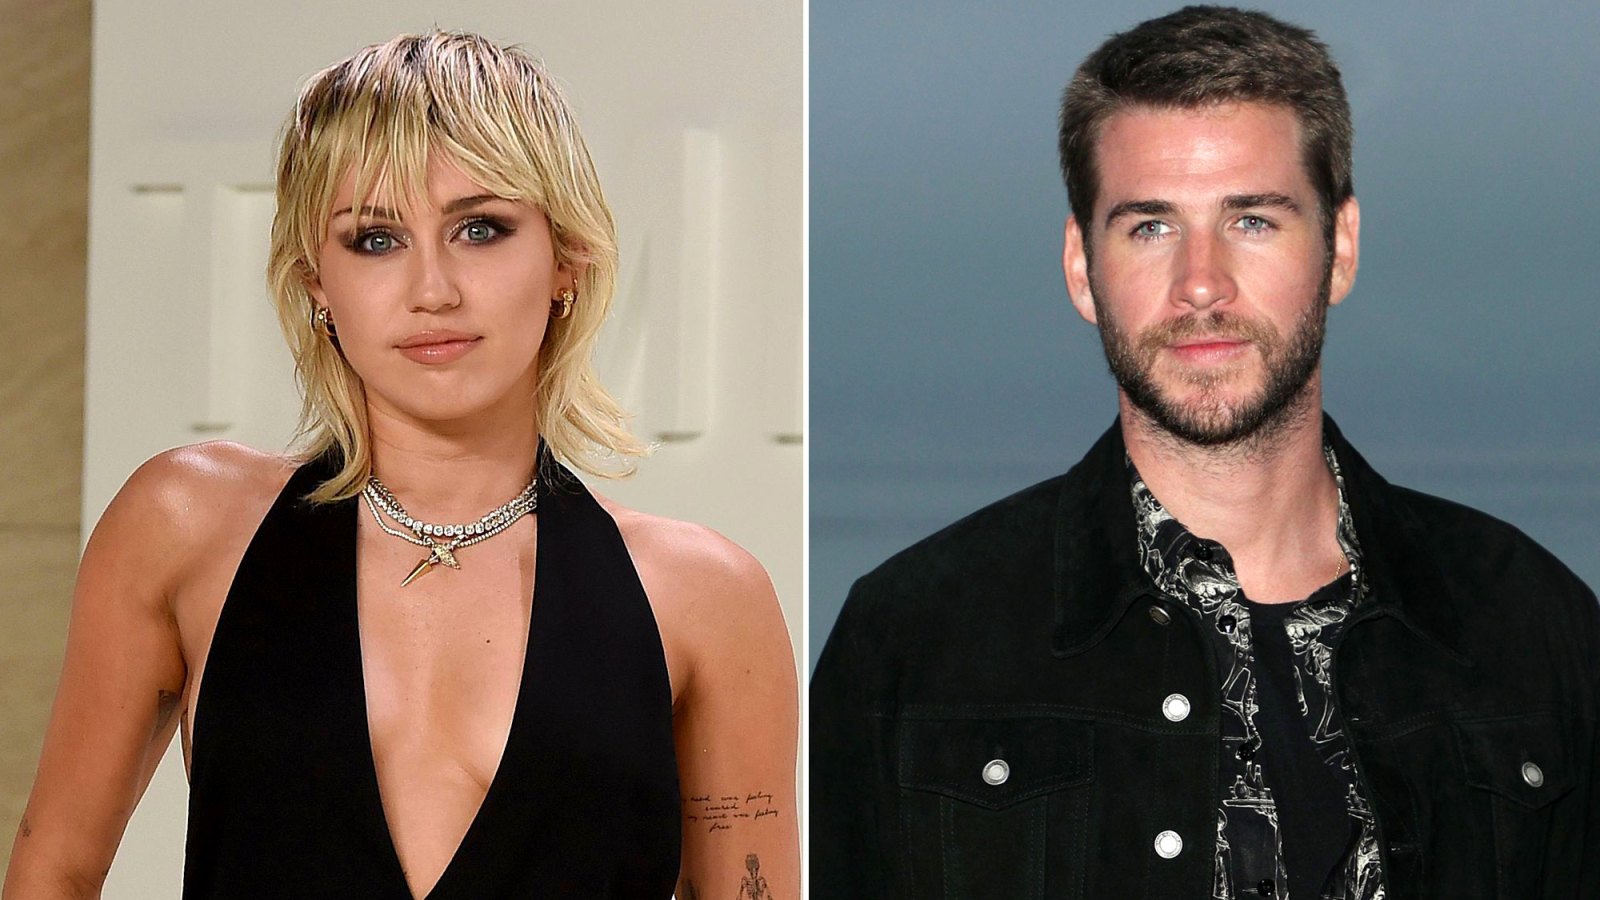 Miley Cyrus and Ex-Husband Liam Hemsworth Avoided Each Other at Pre-Oscars Party